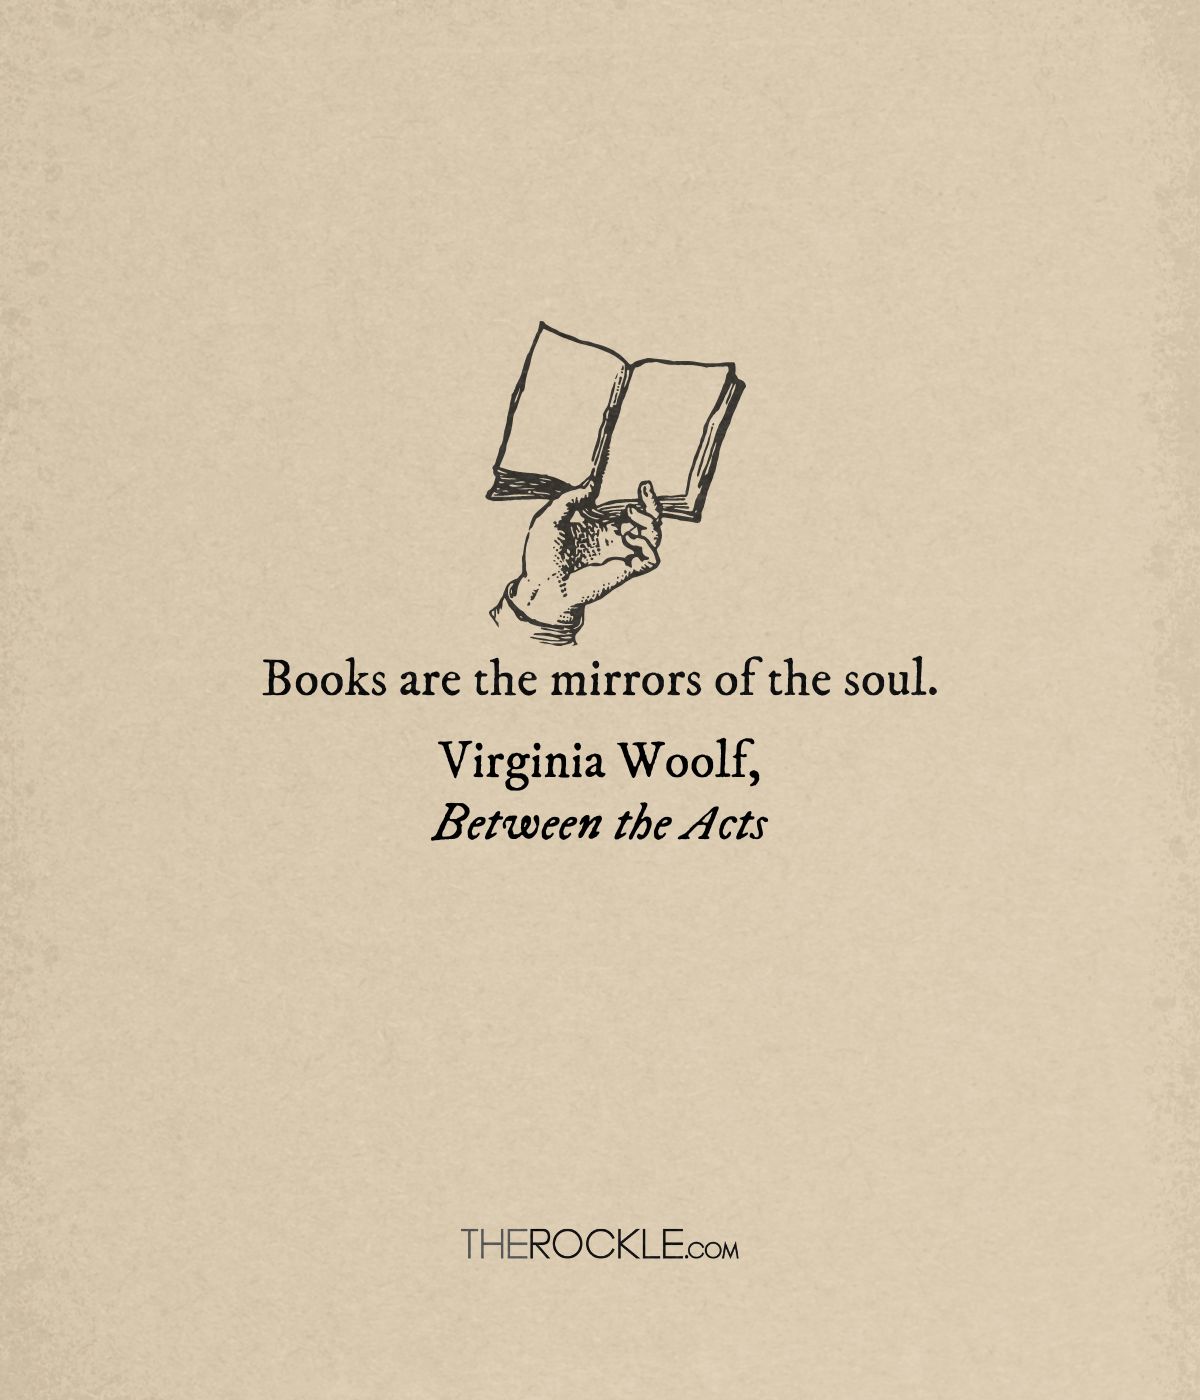 Virginia Woolf quote about books